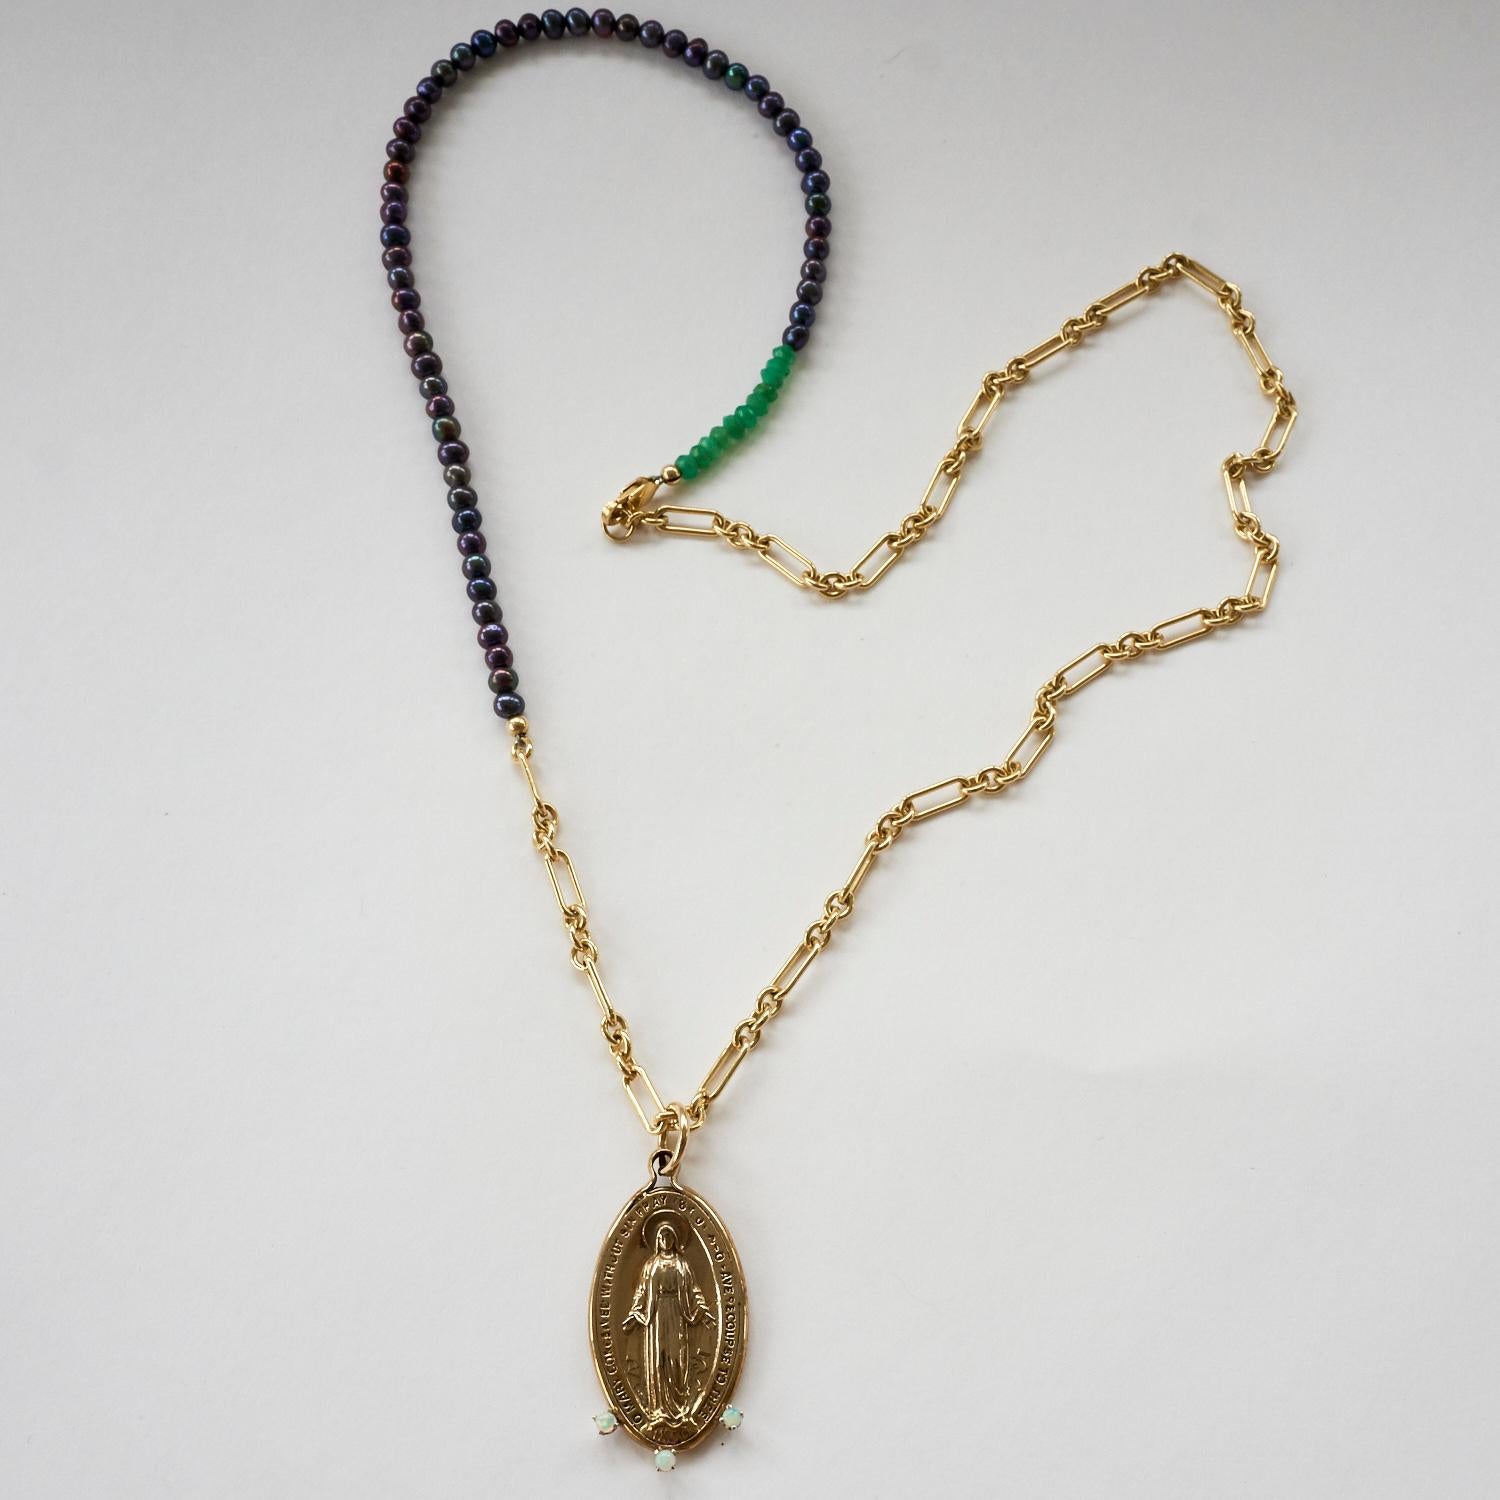 Brilliant Cut Opal Medal Necklace Virgin Mary Black Pearl Long Chain Bronze Gold Filled  For Sale